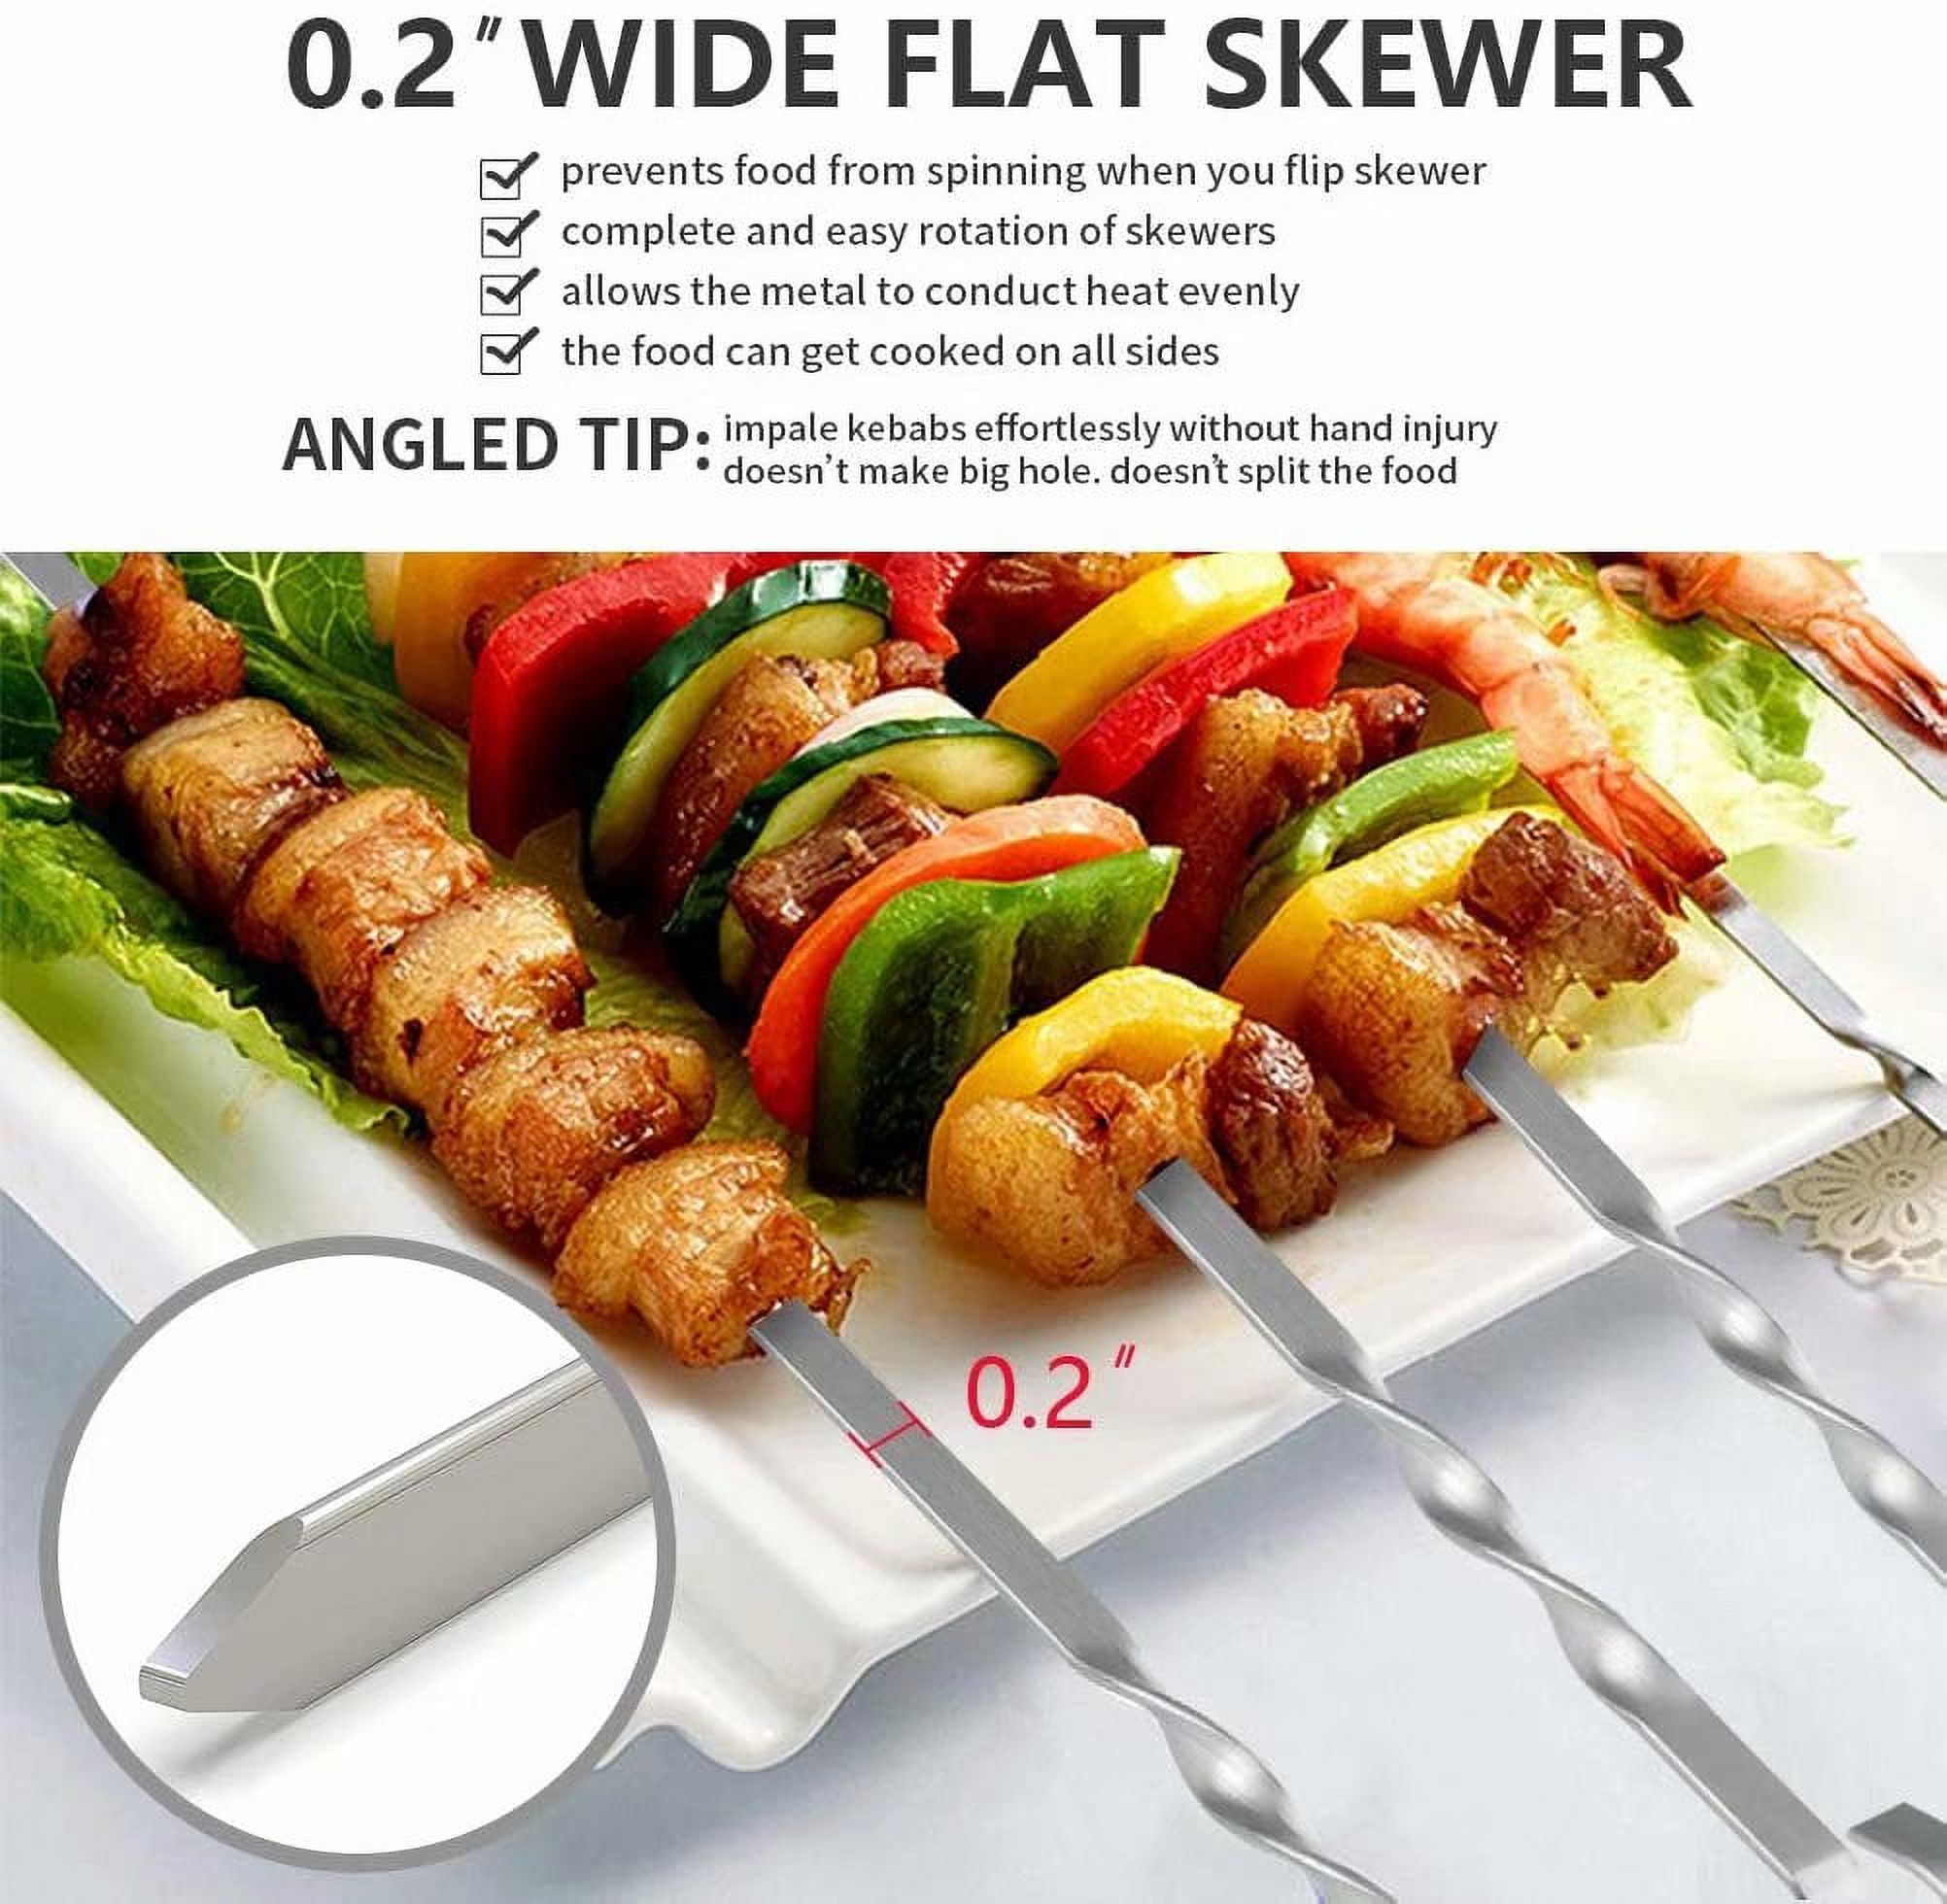 Artrylin Kabob Skewers (Set of 10), Stainless Steel BBQ Barbecue Skewers Set - 15" Flat Metal Skewers for Grilling - Reusable BBQ Sticks with Portable Storage Bag (15" skewers(10 Pack)) - image 3 of 5